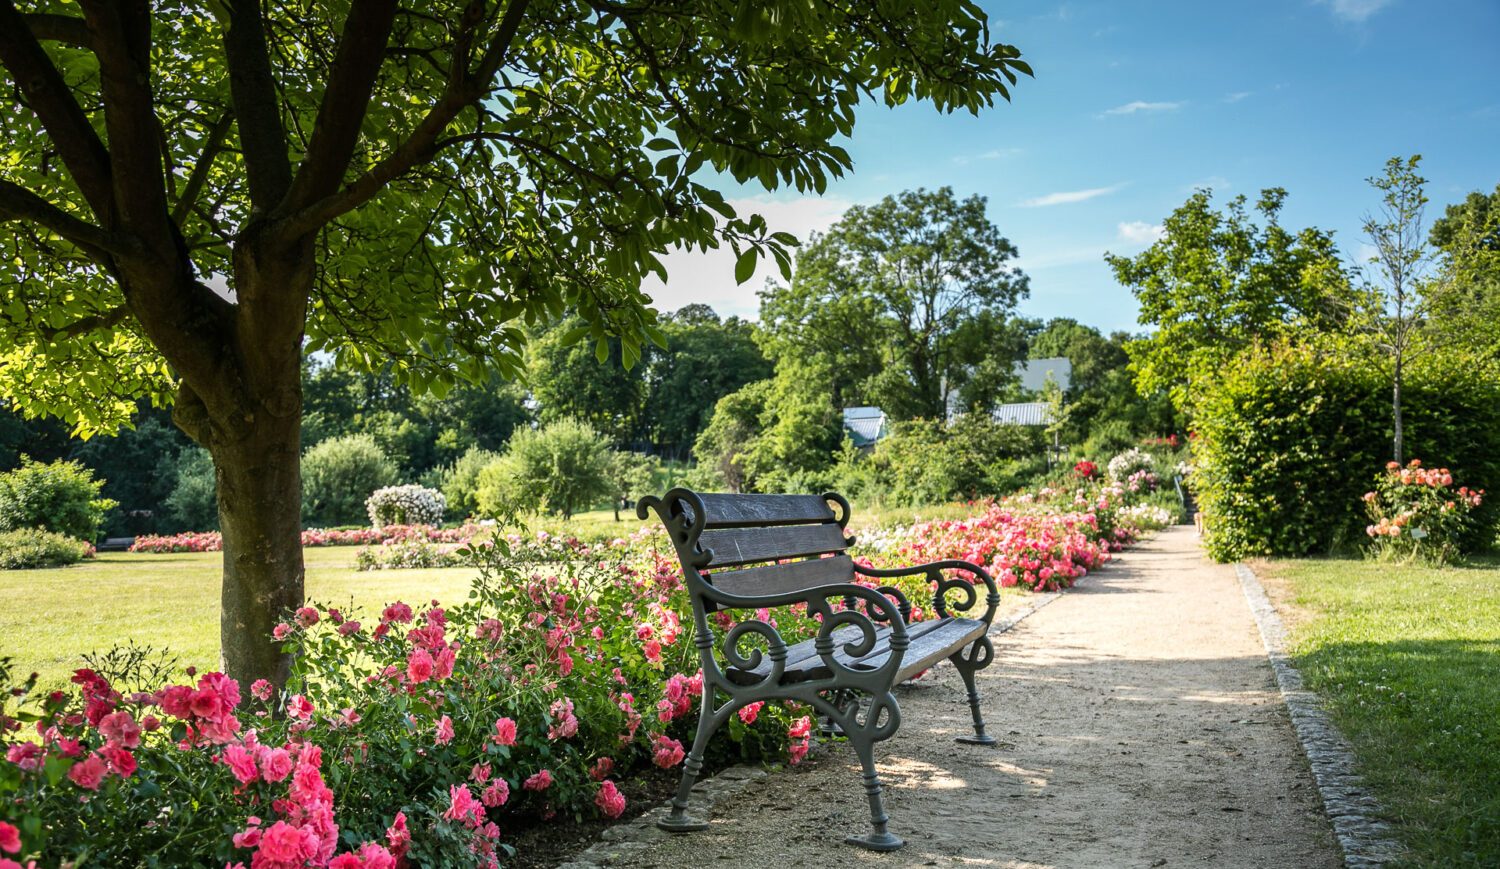 In addition to the many roses, you will find more than 100 different species of trees and shrubs in the Magdalenengarten © Hildesheim Marketing GmbH